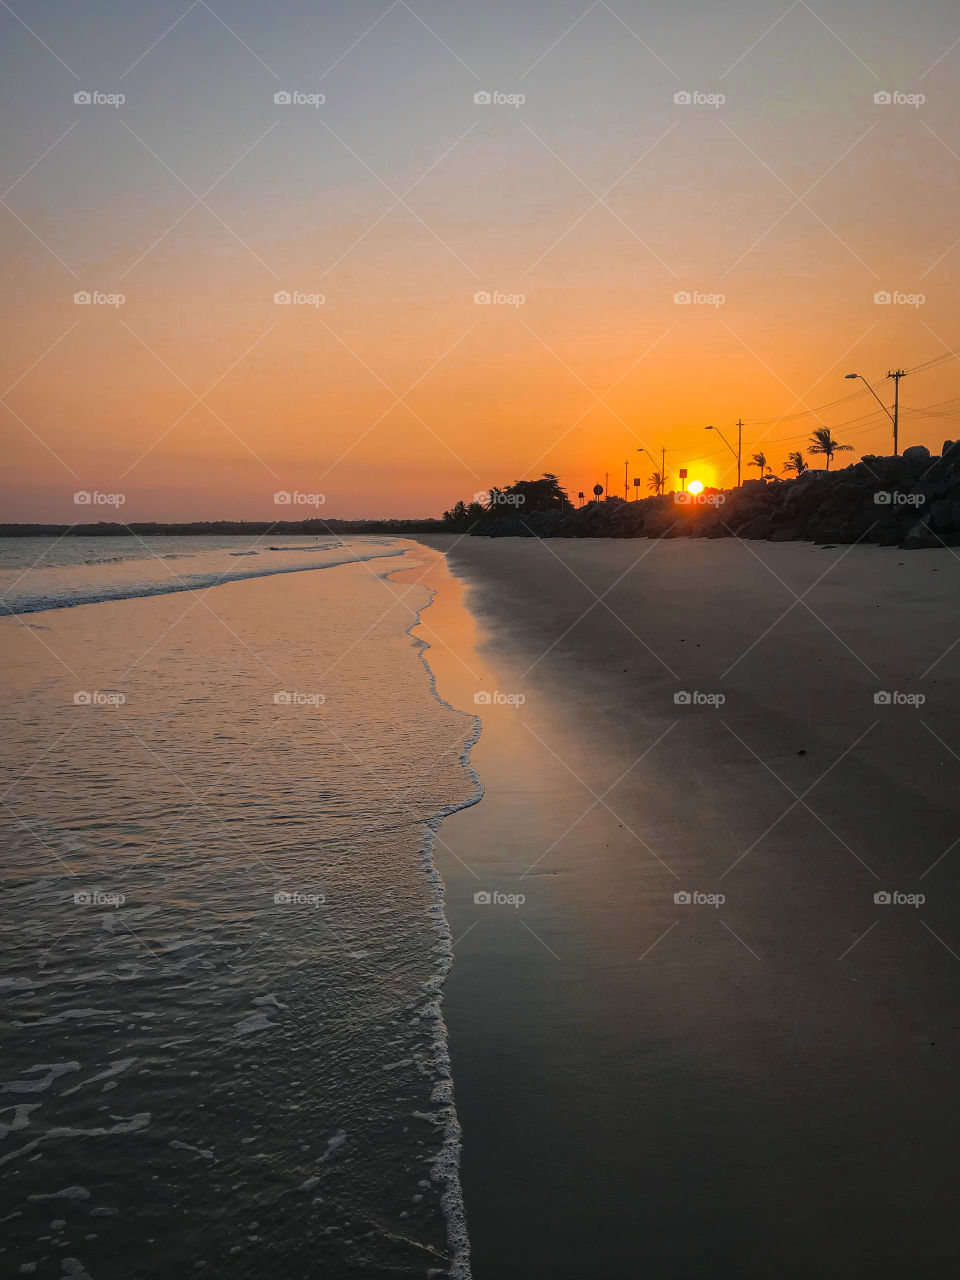 Look at this beautiful sunset in the city of Porto Seguro Bahia.  On a beach popularly known as Ponta Grande!